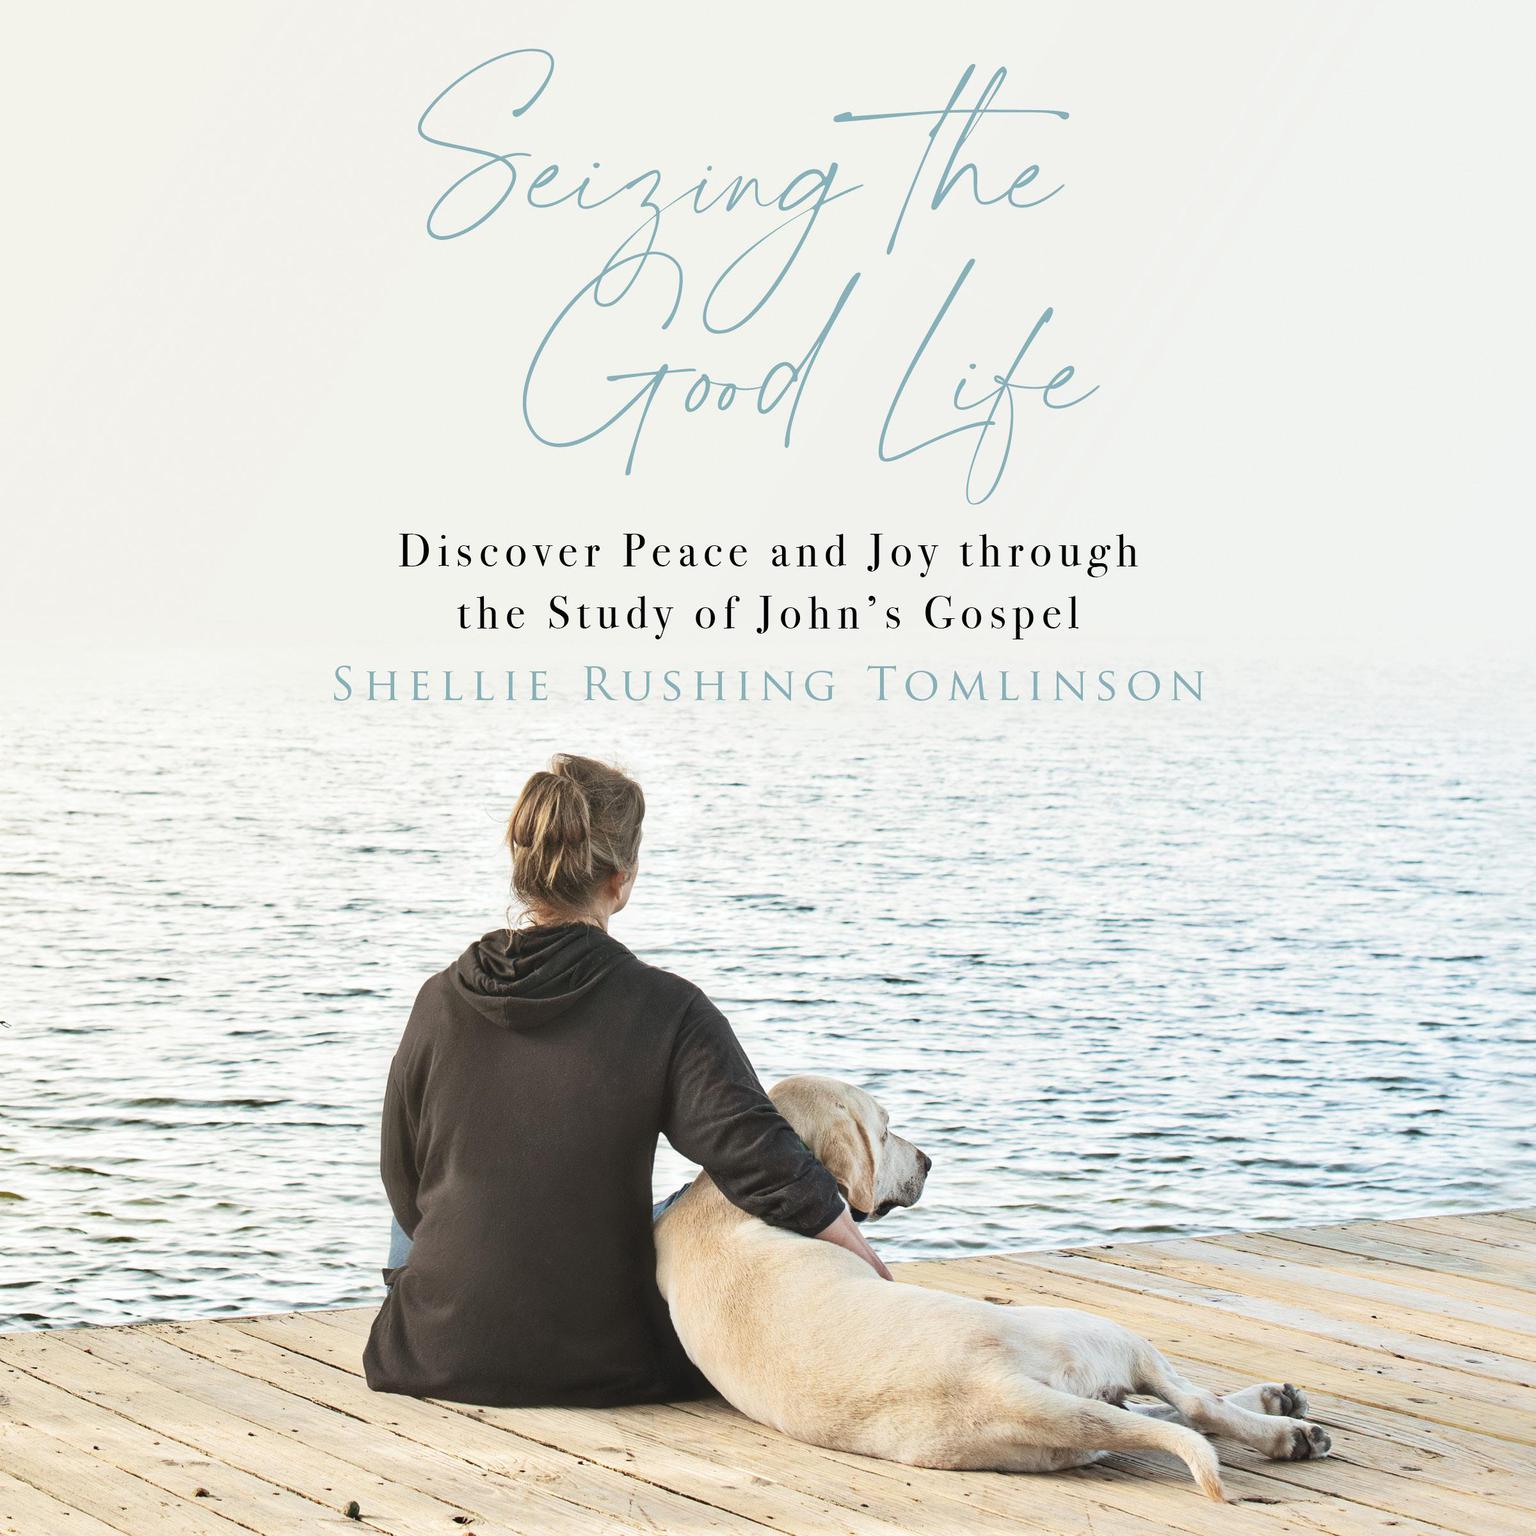 Seizing the Good Life: Discover Peace and Joy through the Study of Johns Gospel Audiobook, by Shellie Rushing Tomlinson